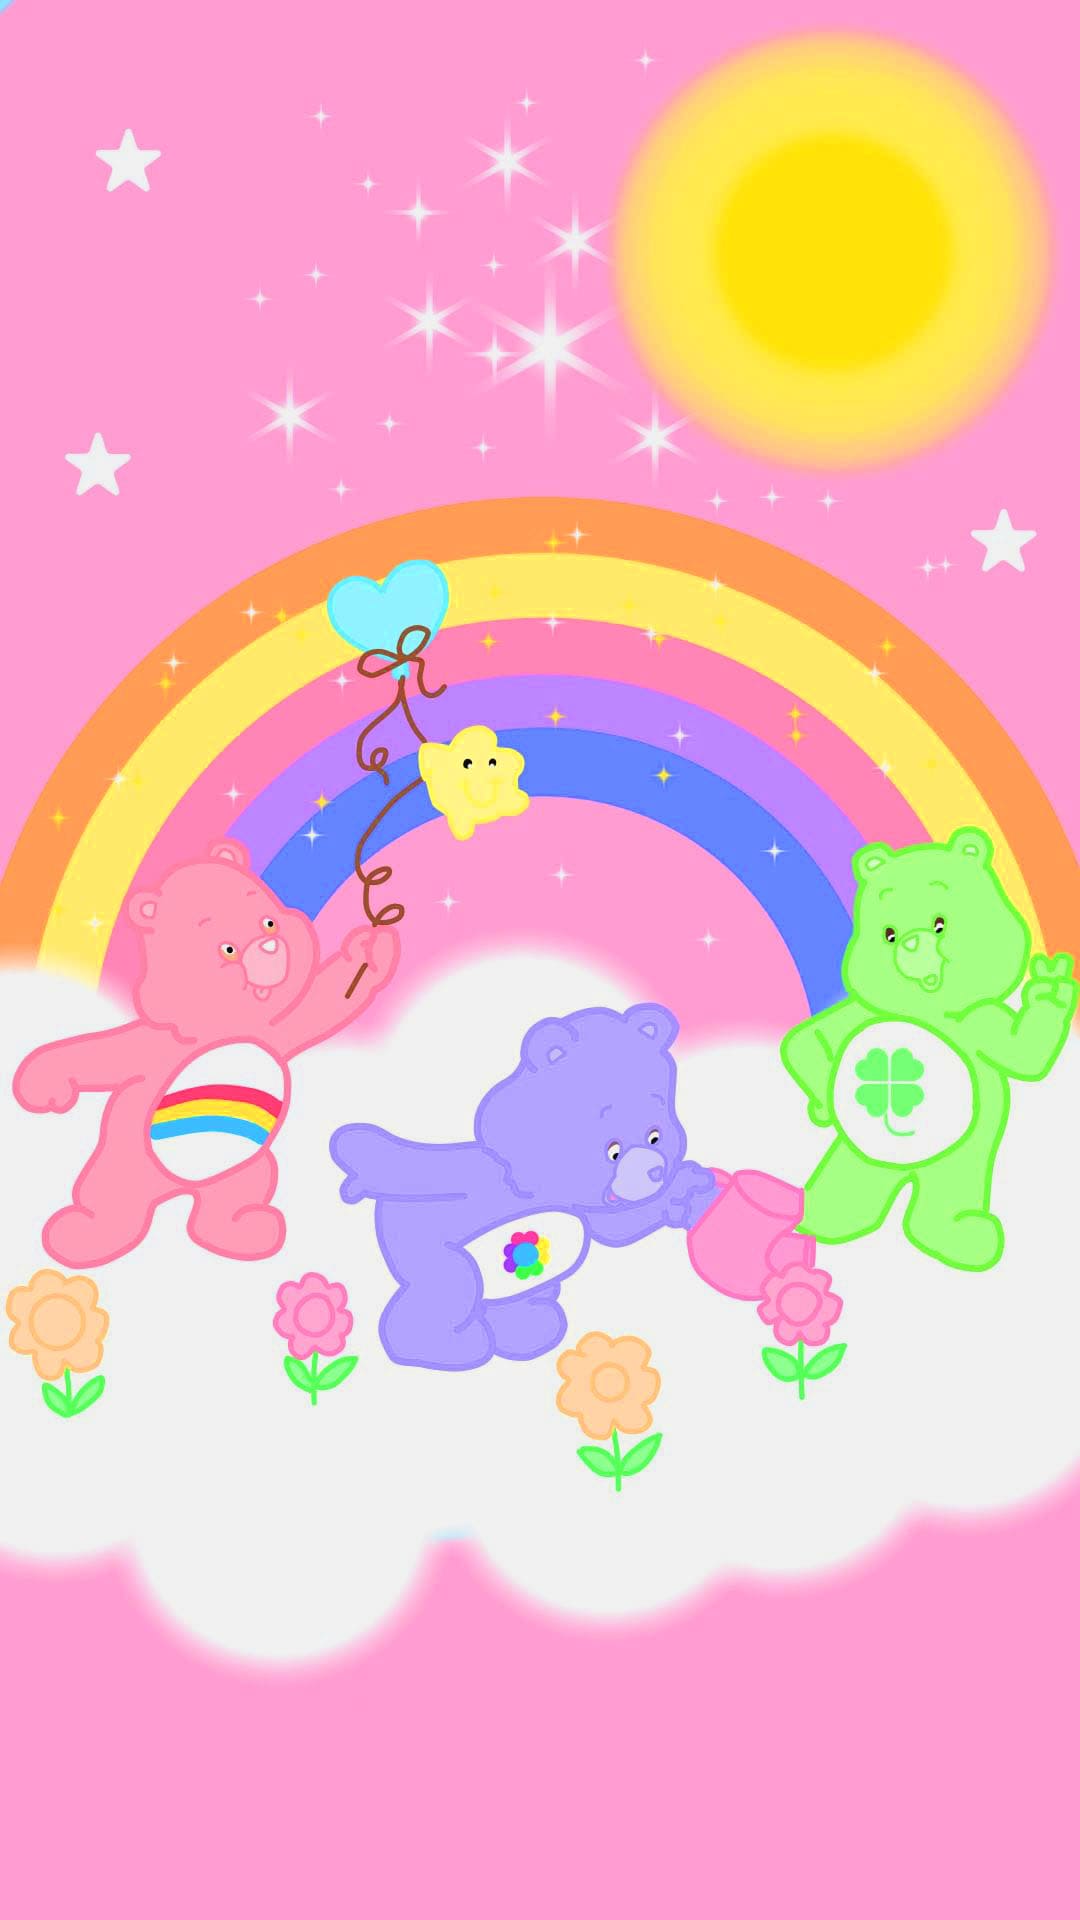 Care Bears iPhone Wallpaper with high-resolution 1080x1920 pixel. You can use this wallpaper for your iPhone 5, 6, 7, 8, X, XS, XR backgrounds, Mobile Screensaver, or iPad Lock Screen - Care Bears